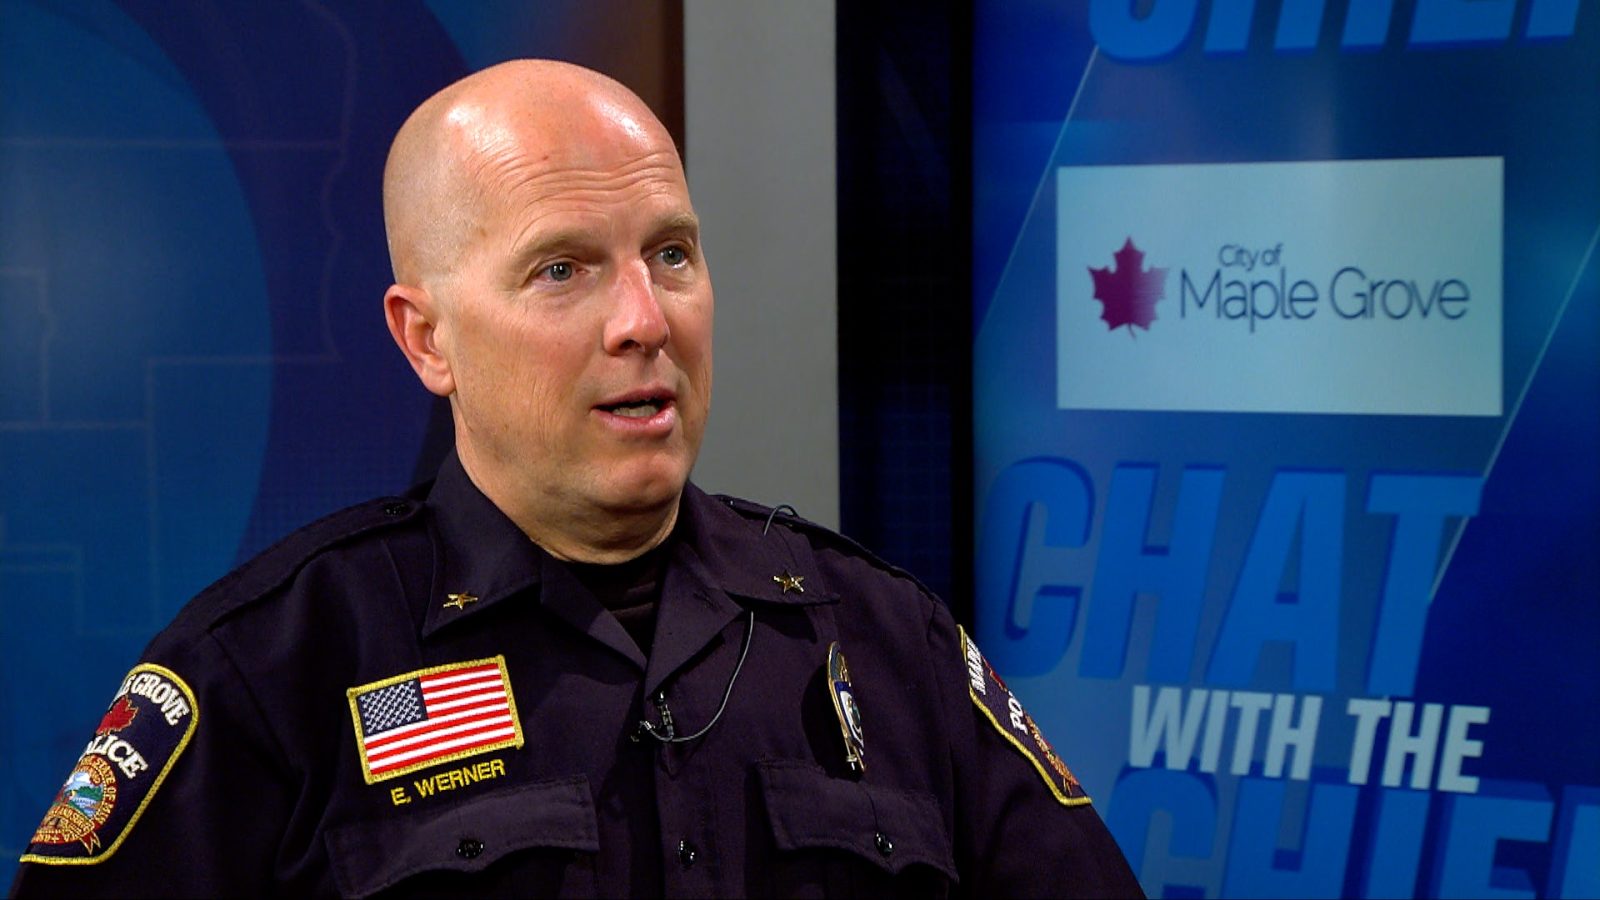 Maple Grove Police Chief Eric Werner